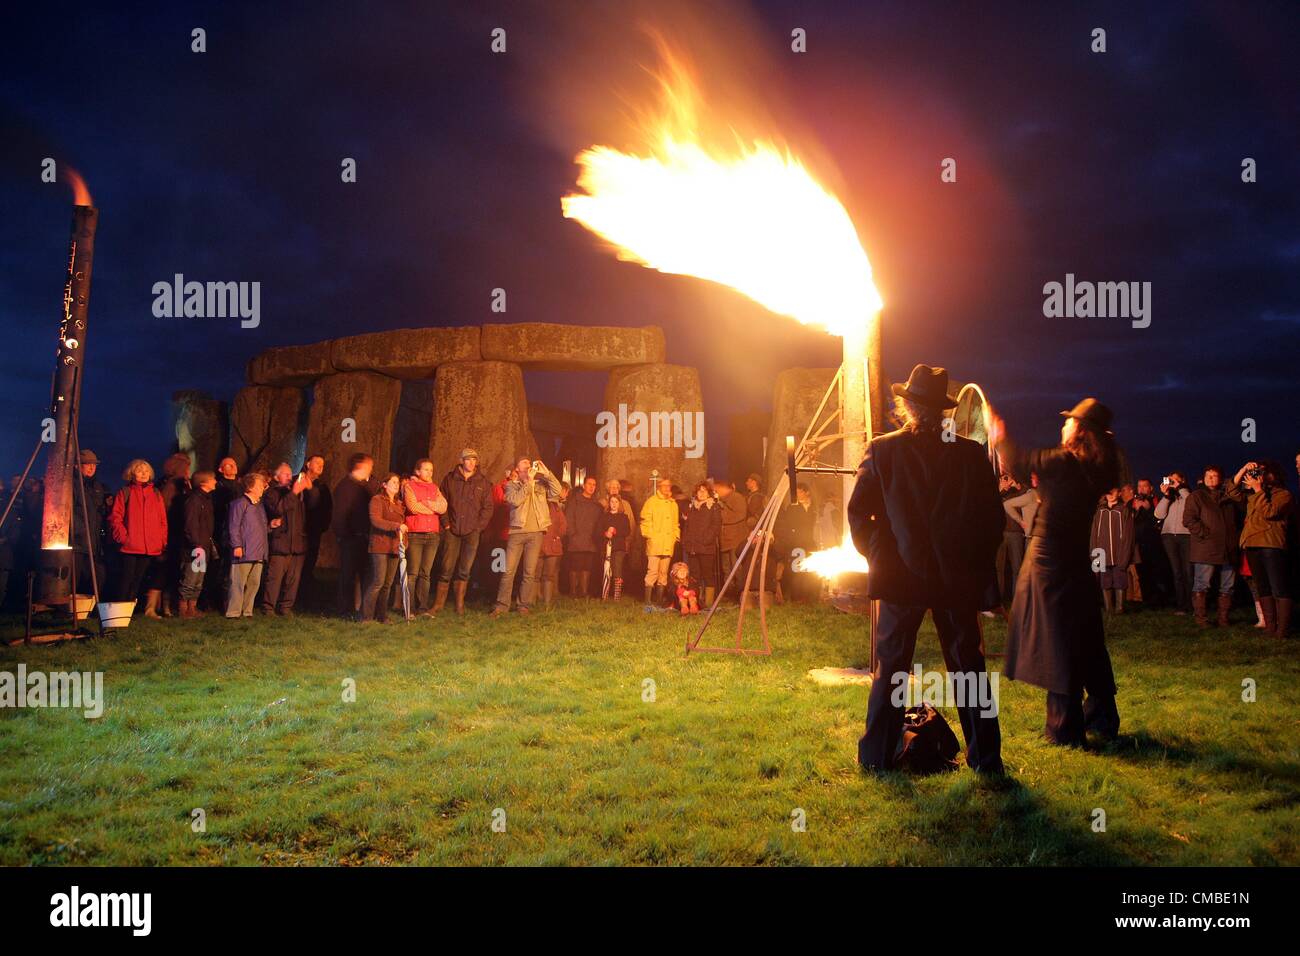 Wiltshire, UK. Tuesday 10th July 2012. French outdoor fire alchemists Compagnie Carabosse present the FIRE GARDEN at the World Heritage Site Stonehenge in Wiltshire.  The performance from the 10th -12th July is part of the London 2012 Festival. Stock Photo